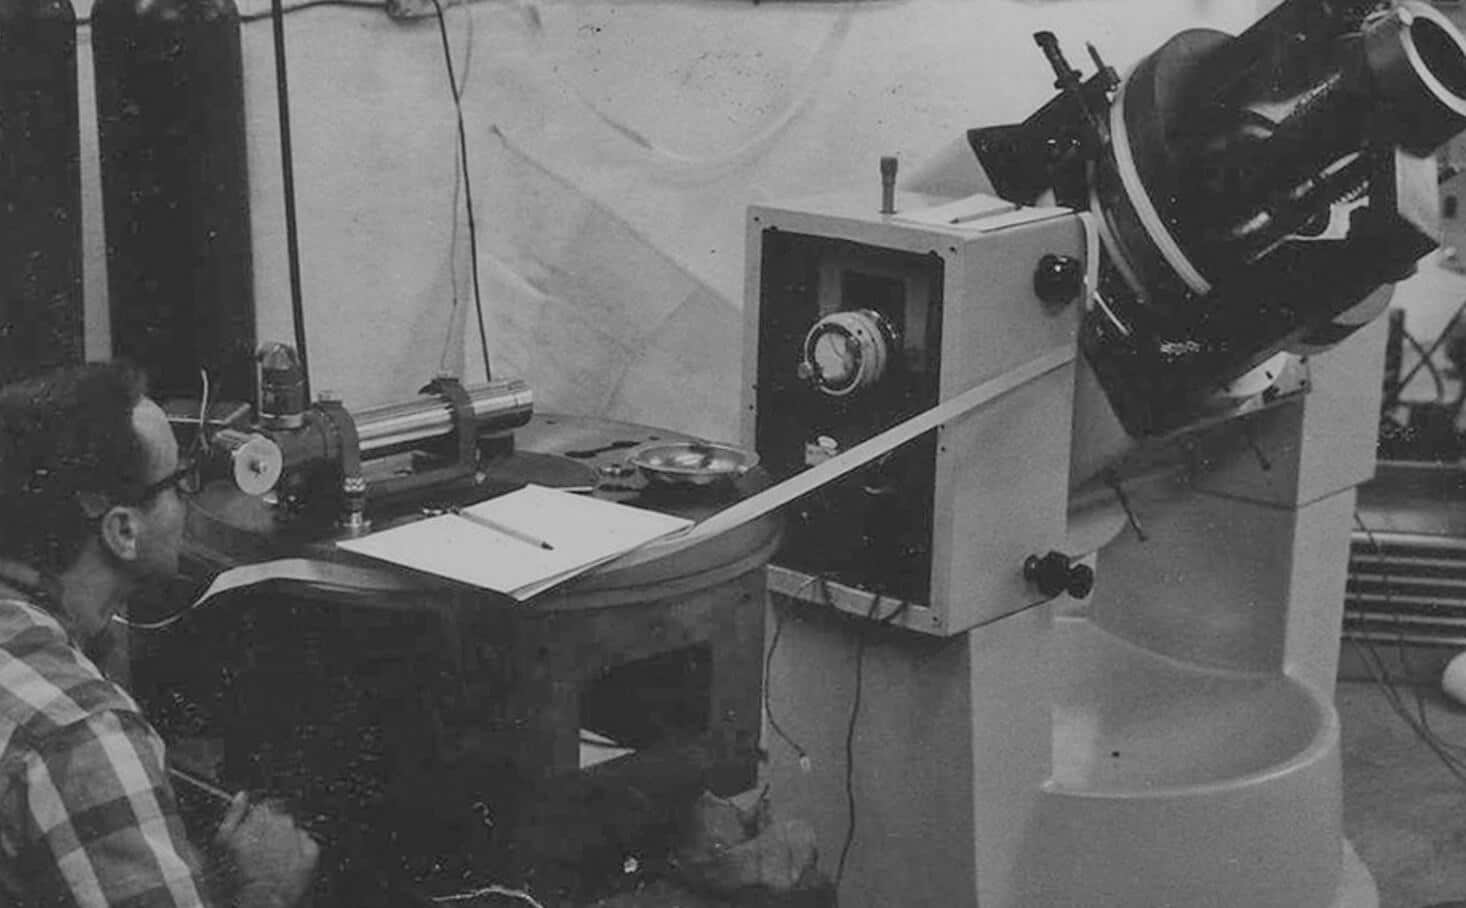 Founder Stephen J. Botos using an autocollimator to measure a system's performance, pre-Aerotech.